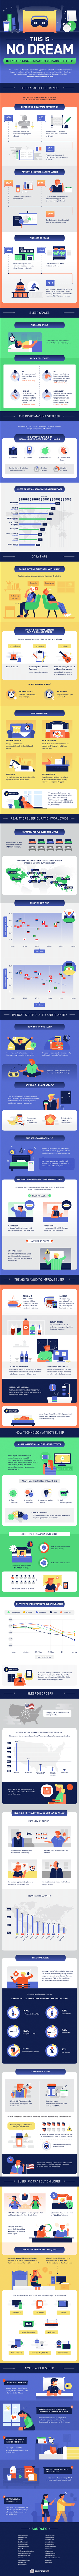 Eye-Opening Stats & Facts About Sleep (Infographic)